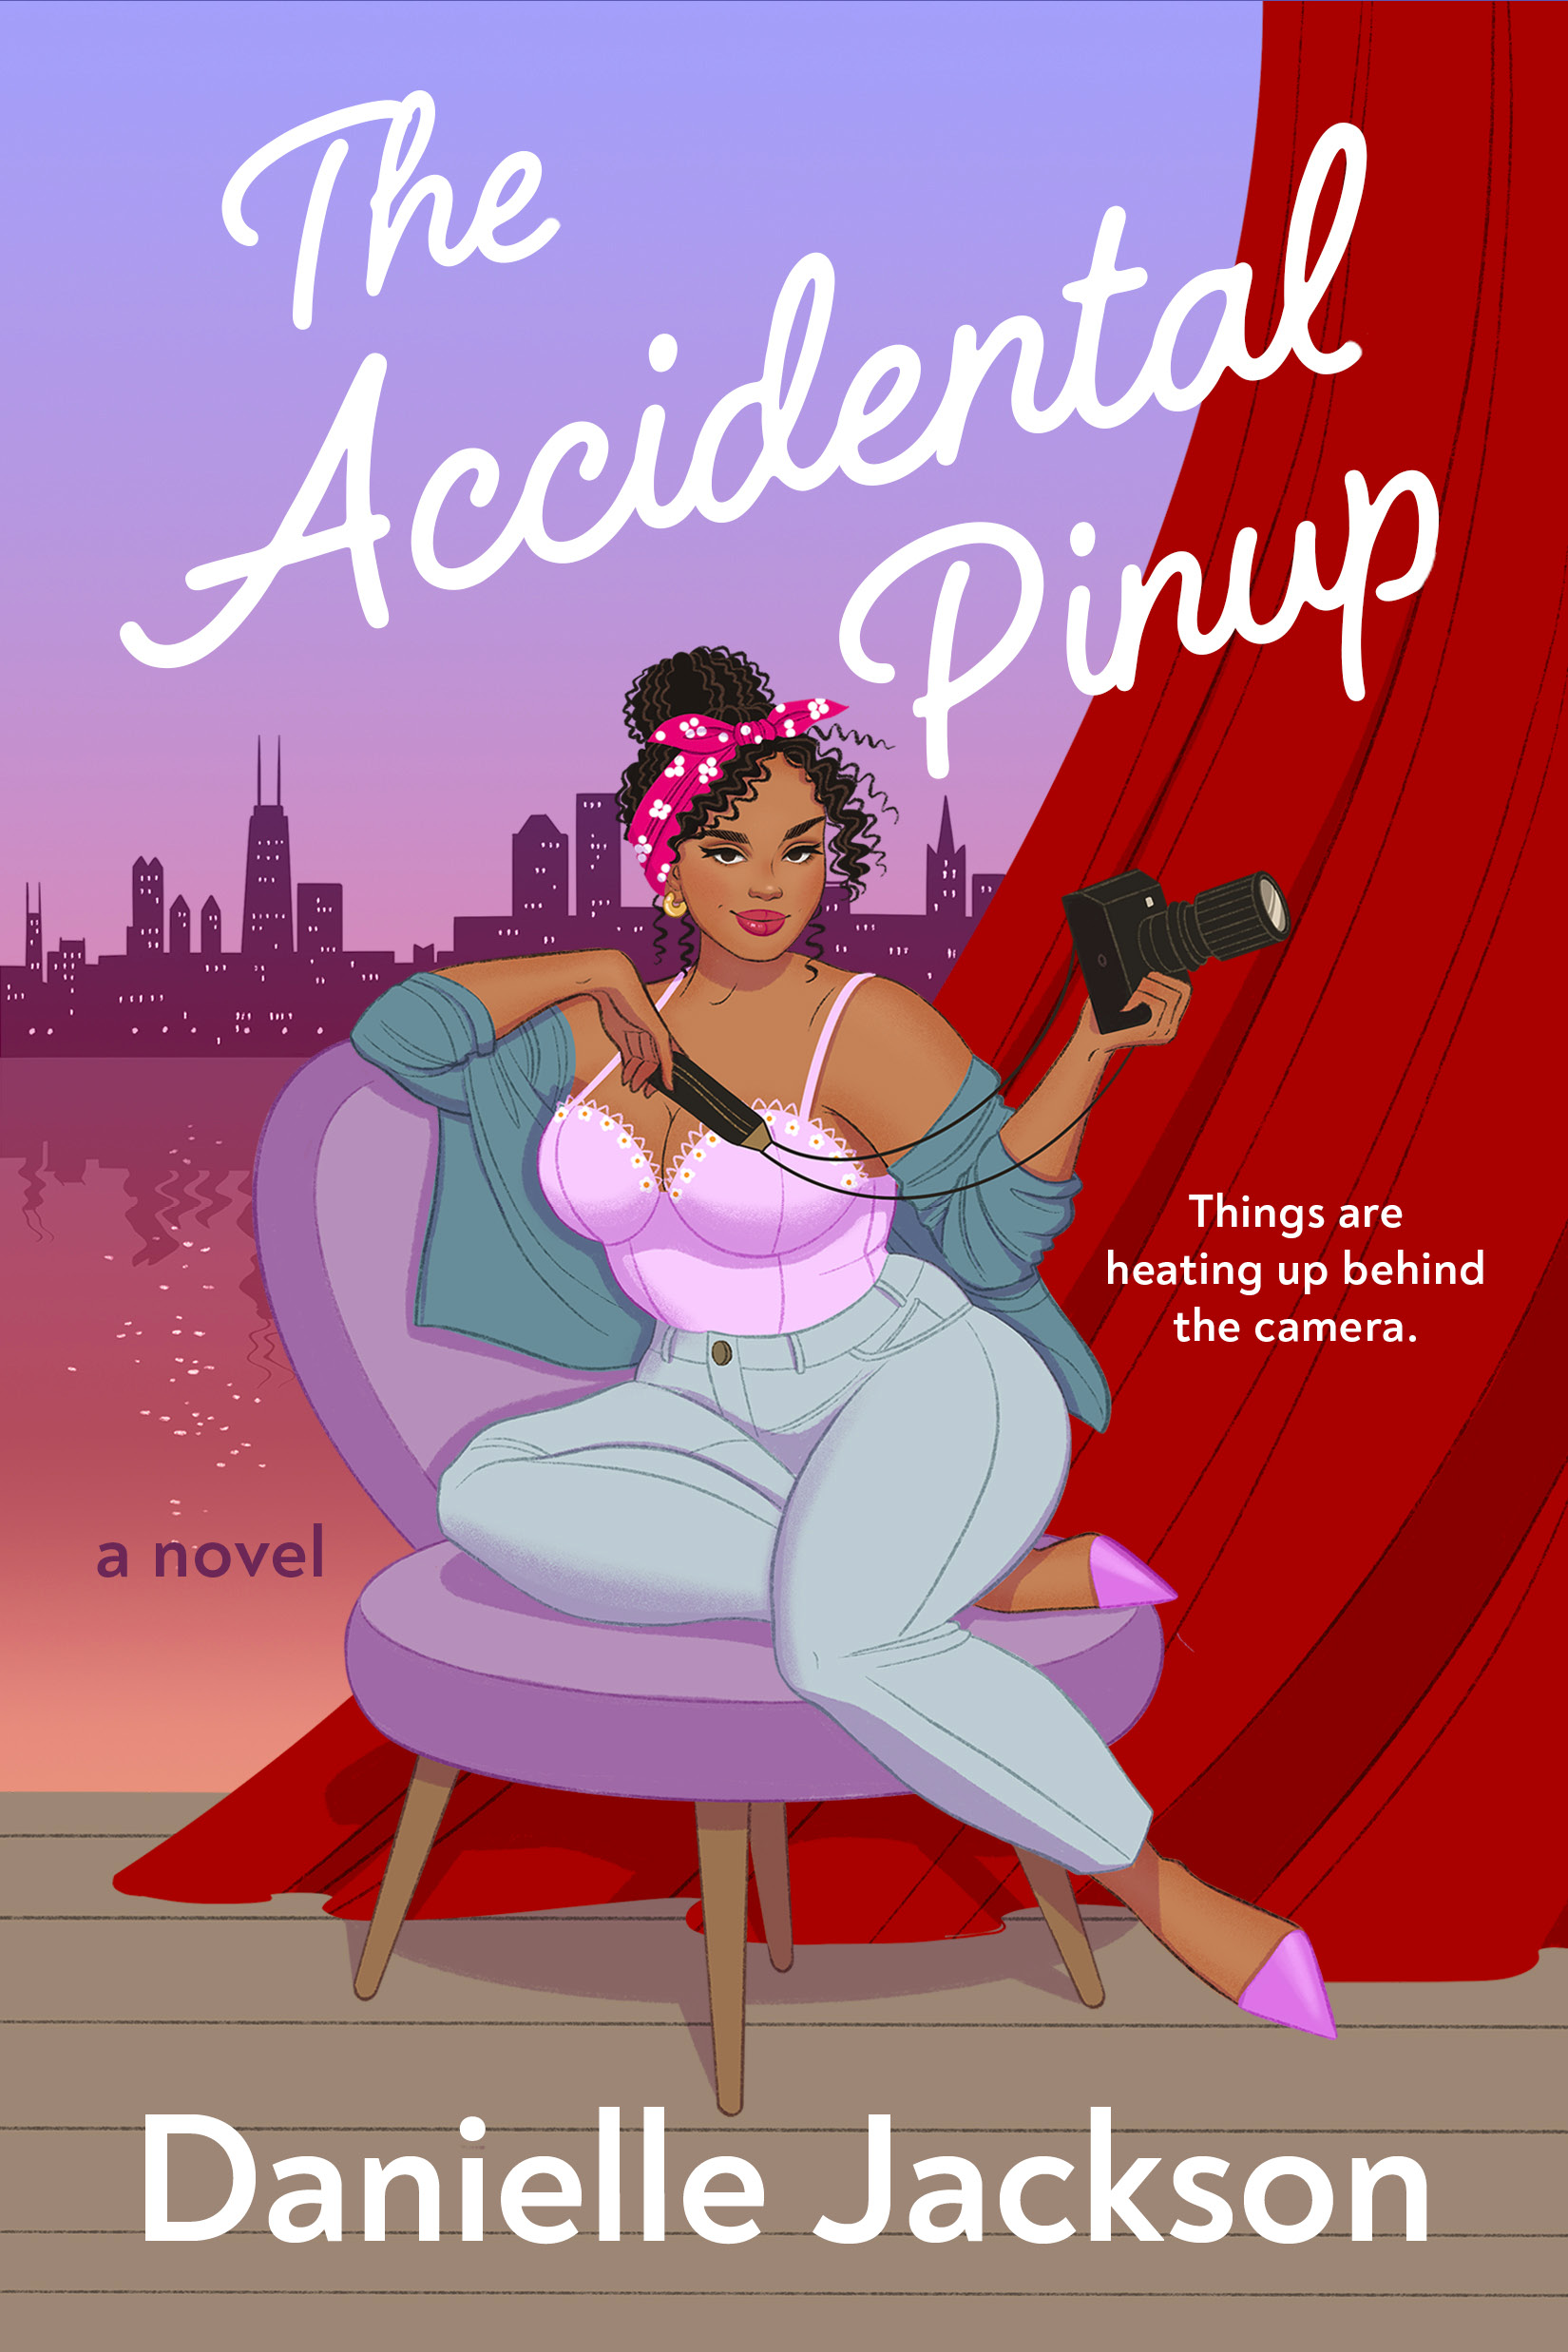 In-Person Event with Danielle Jackson/The Accidental Pinup